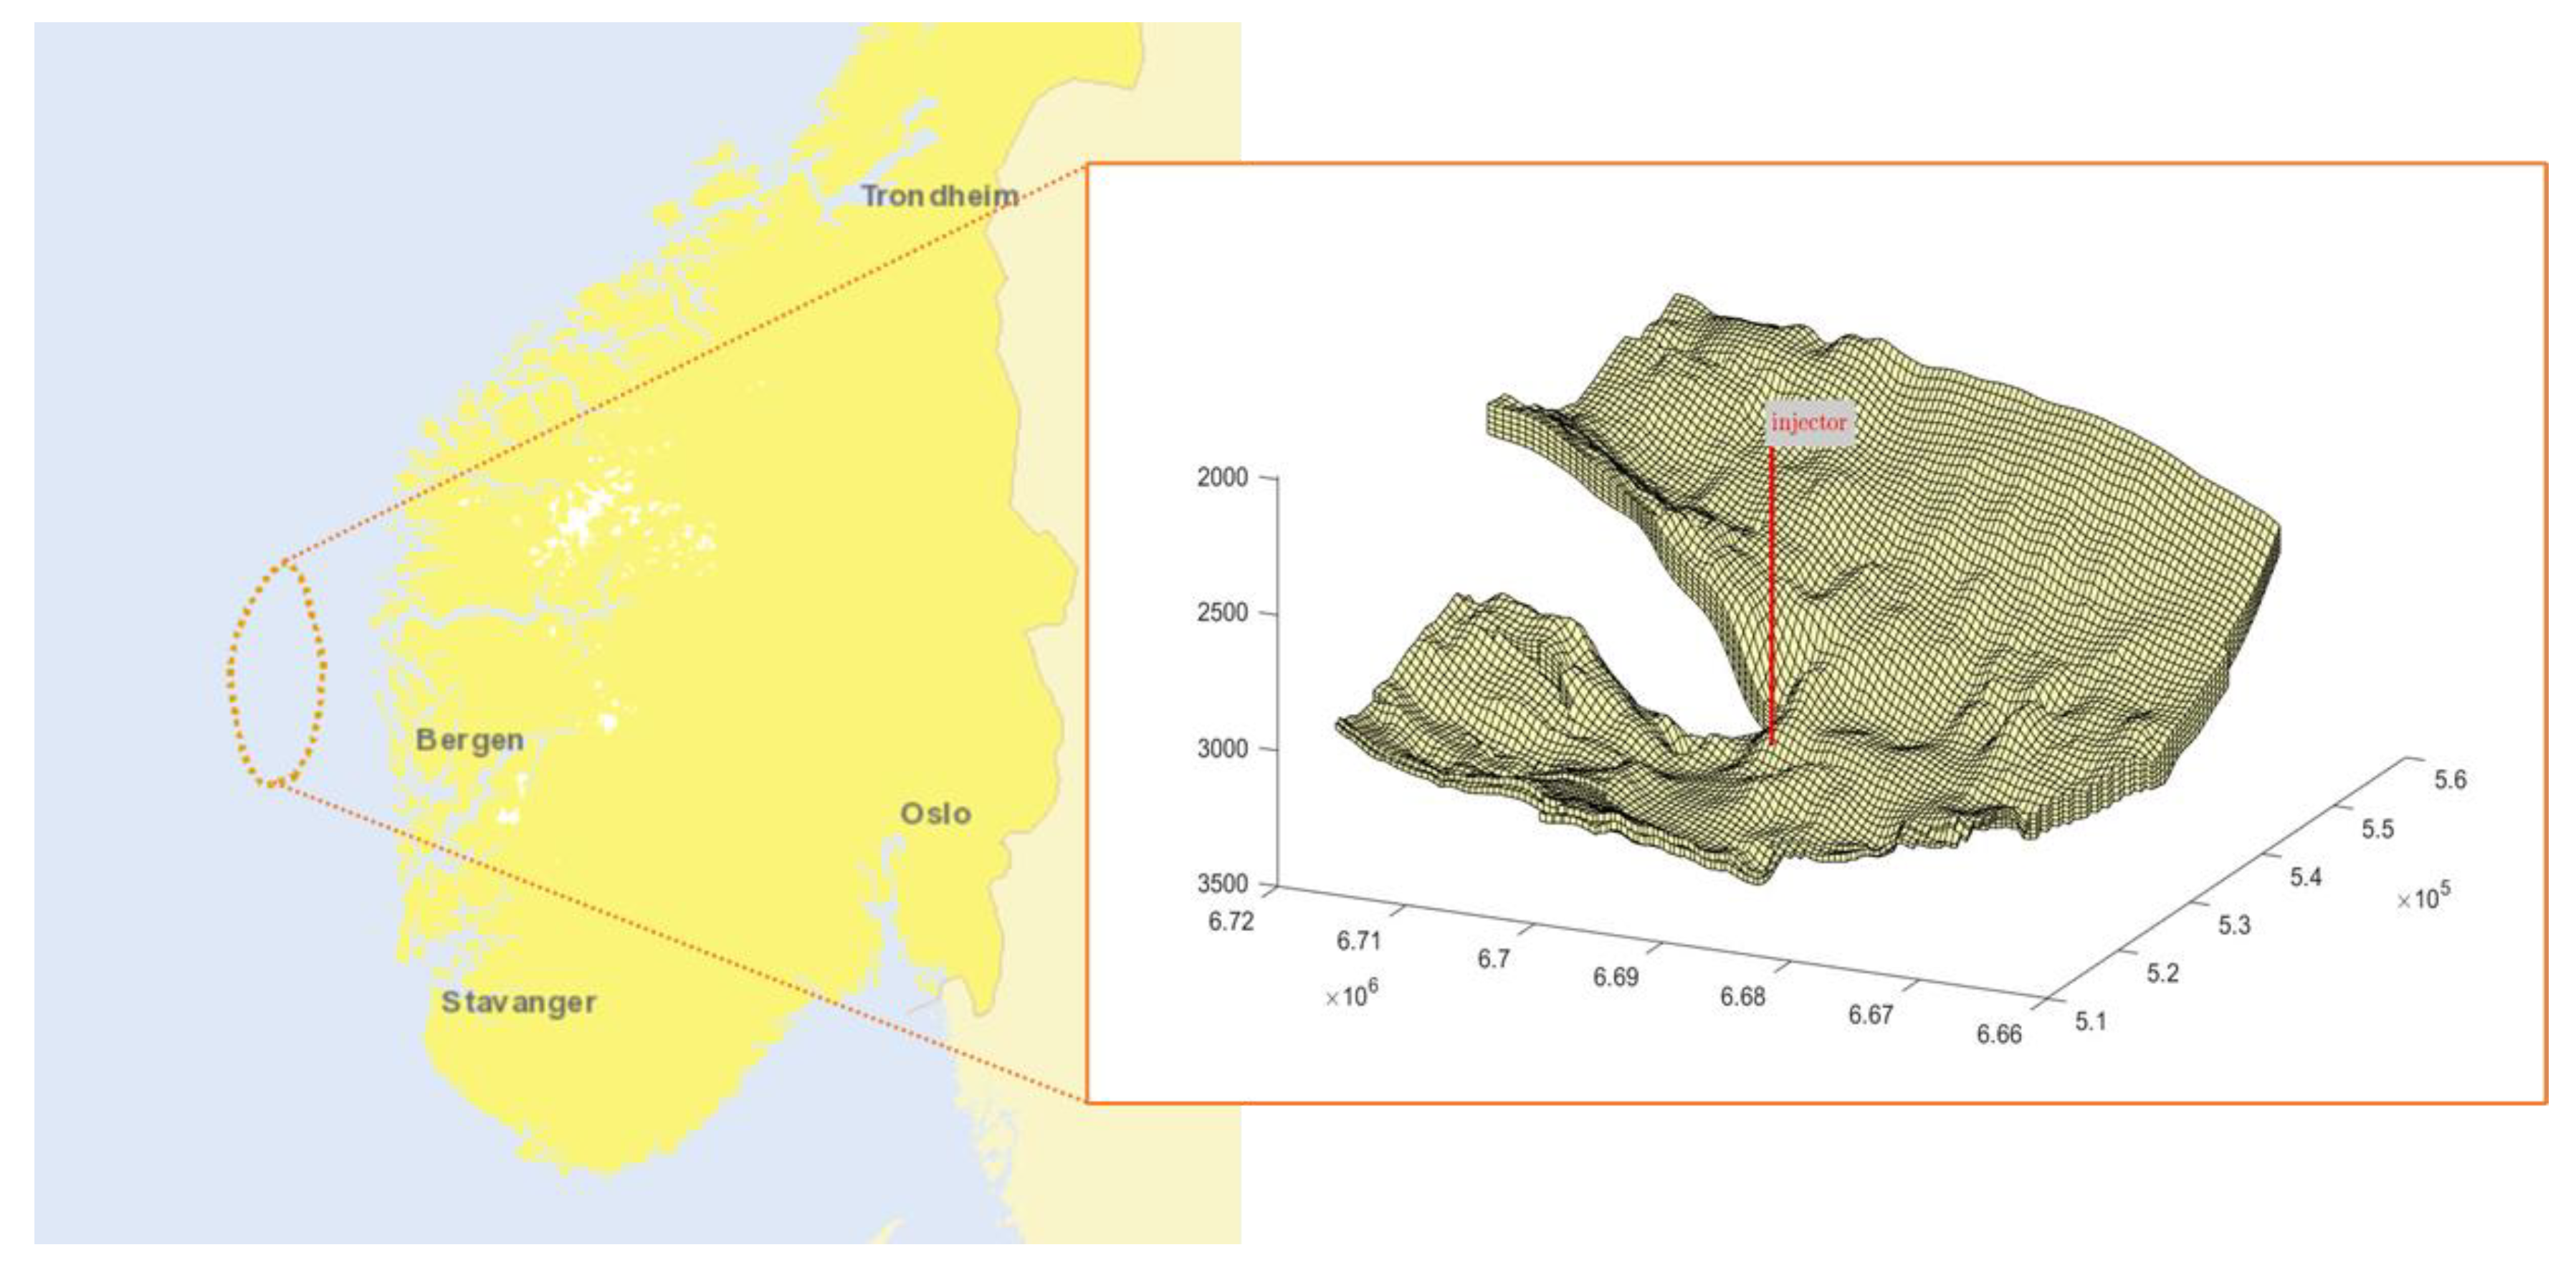 Review on Multiscale CO2 Mineralization and Geological Storage: Mechanisms,  Characterization, Modeling, Applications and Perspectives